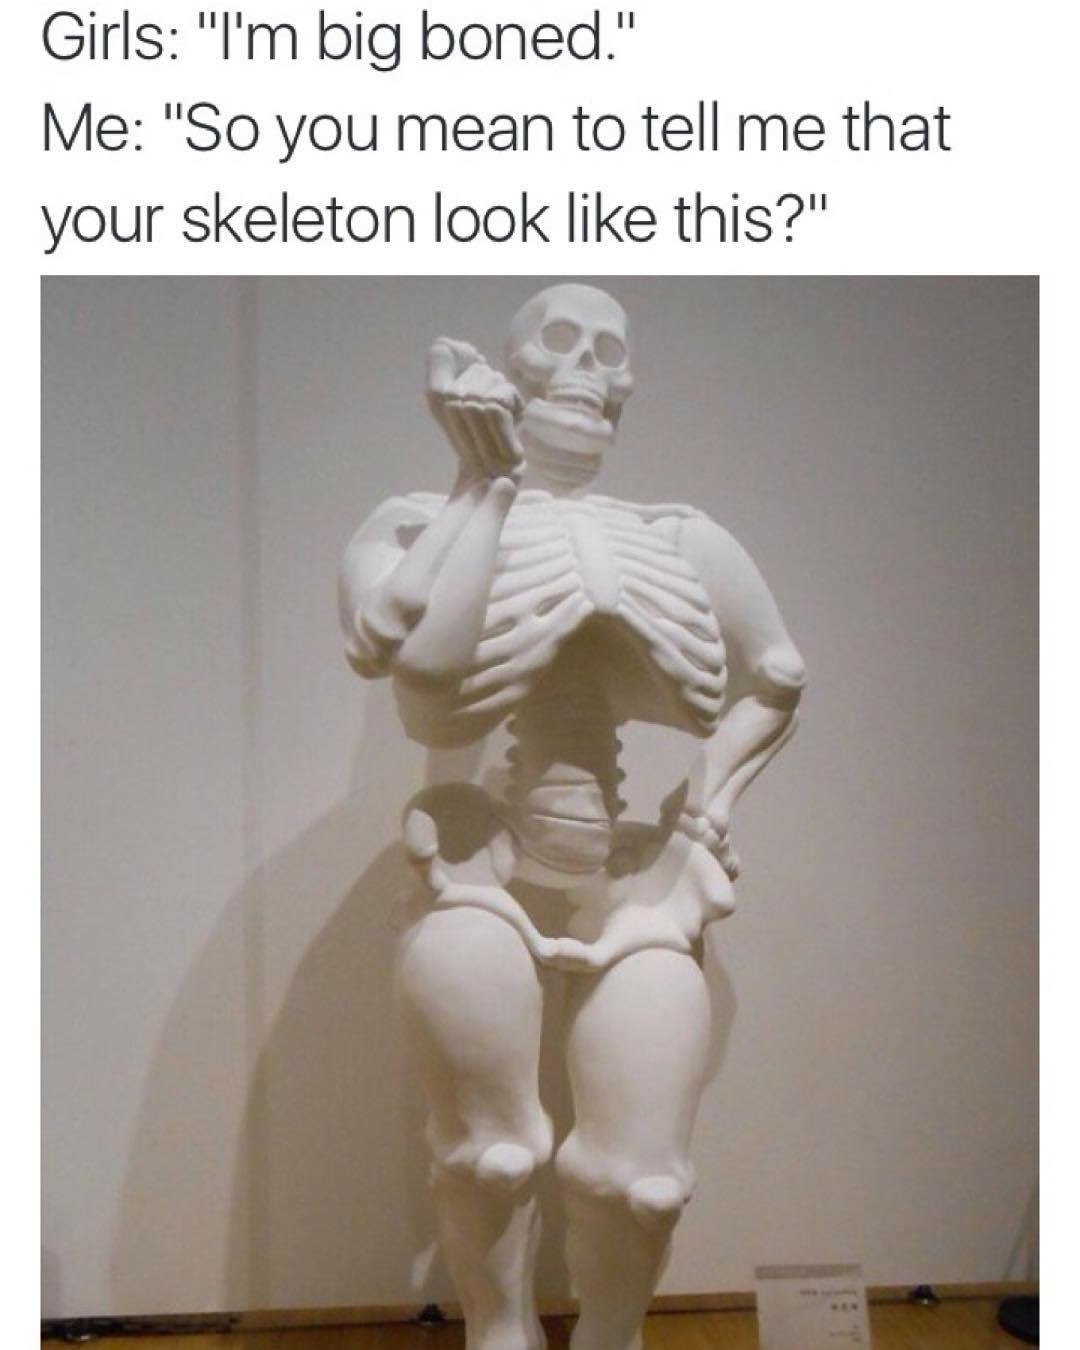 im big boned meme - Girls "I'm big boned." Me "So you mean to tell me that your skeleton look this?"